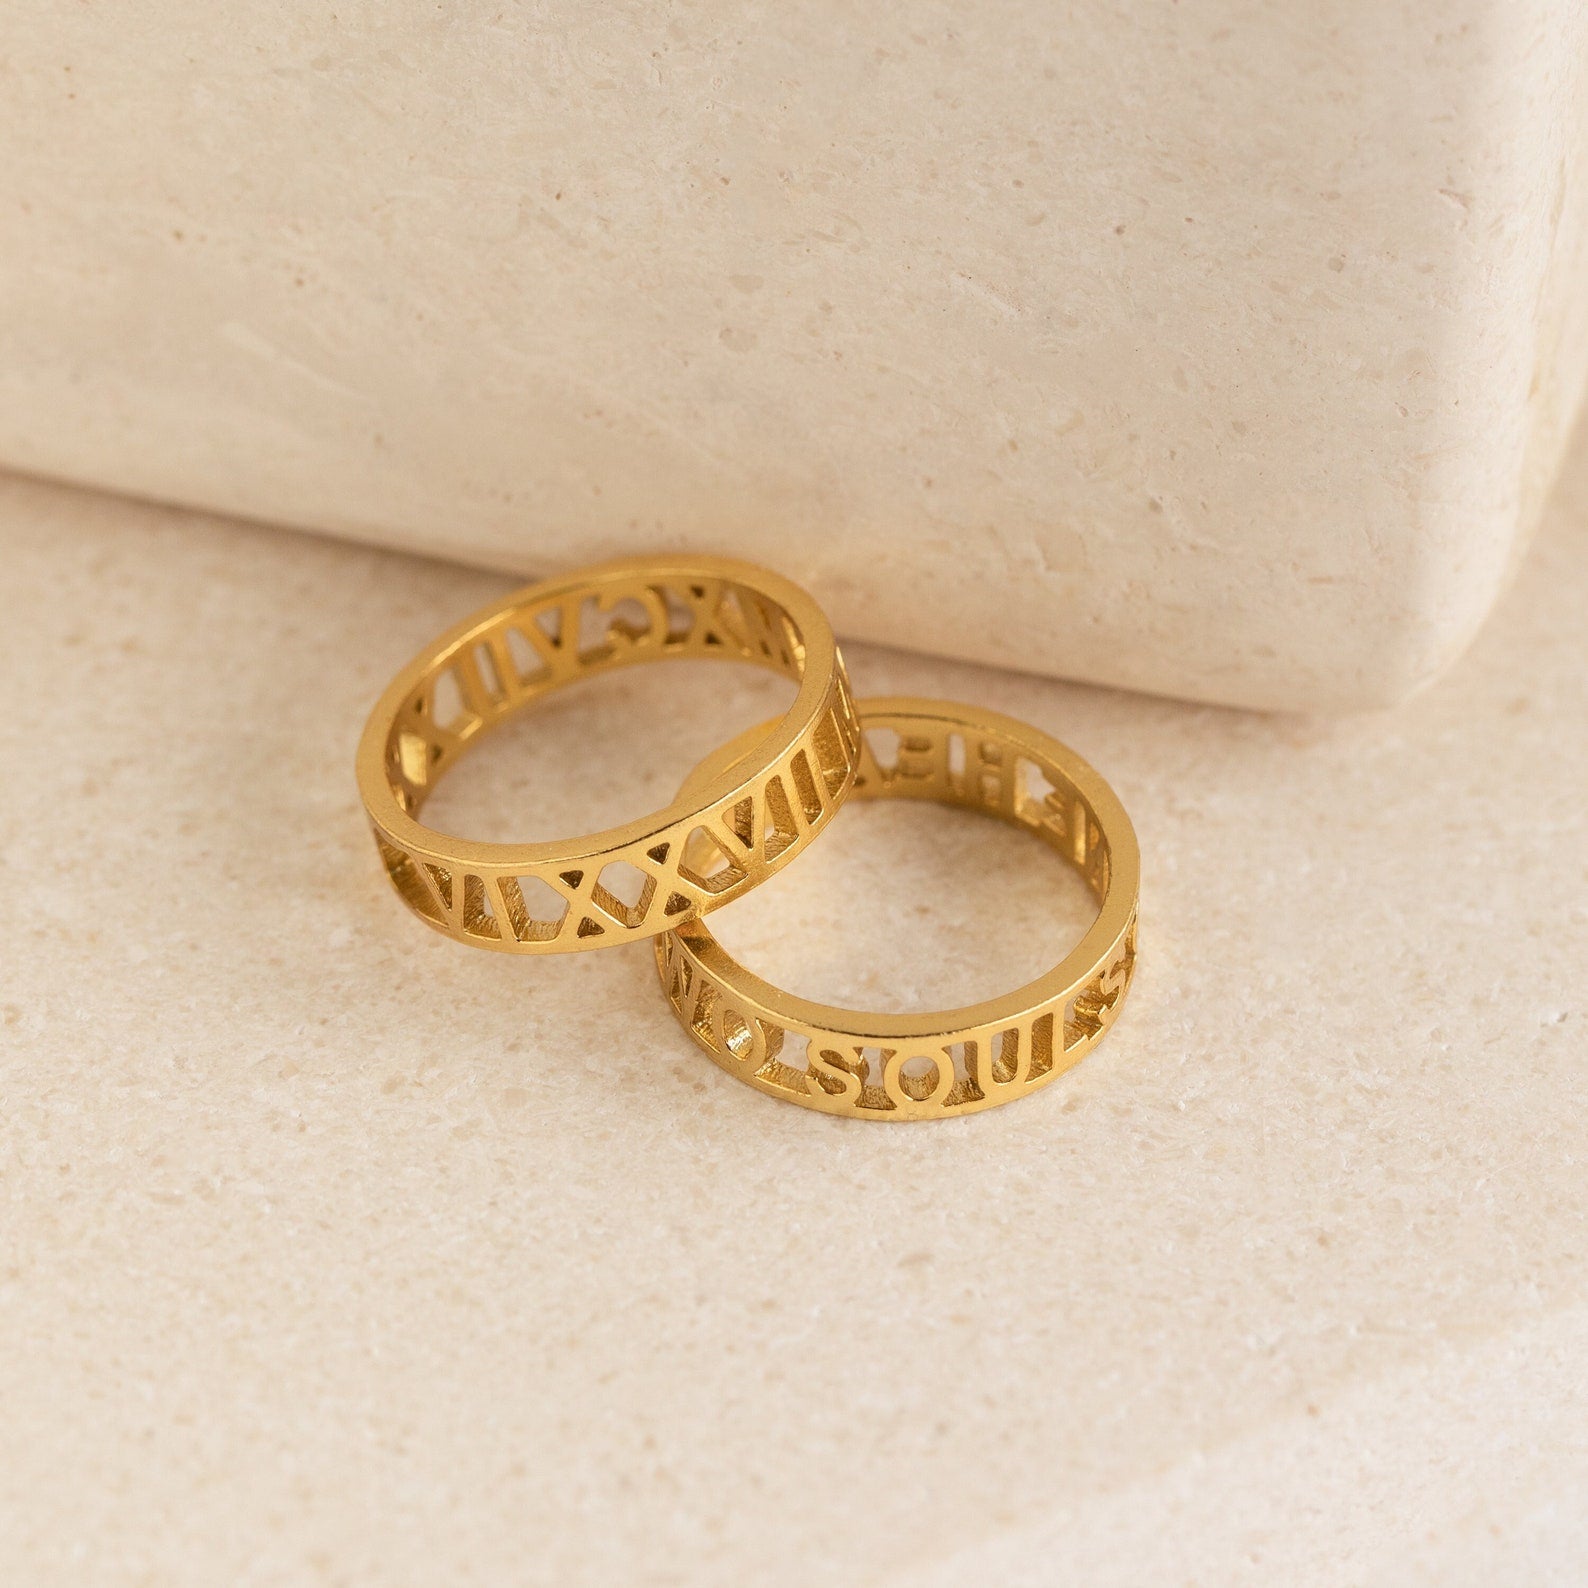 Lovely Name Engraved Couple Rings